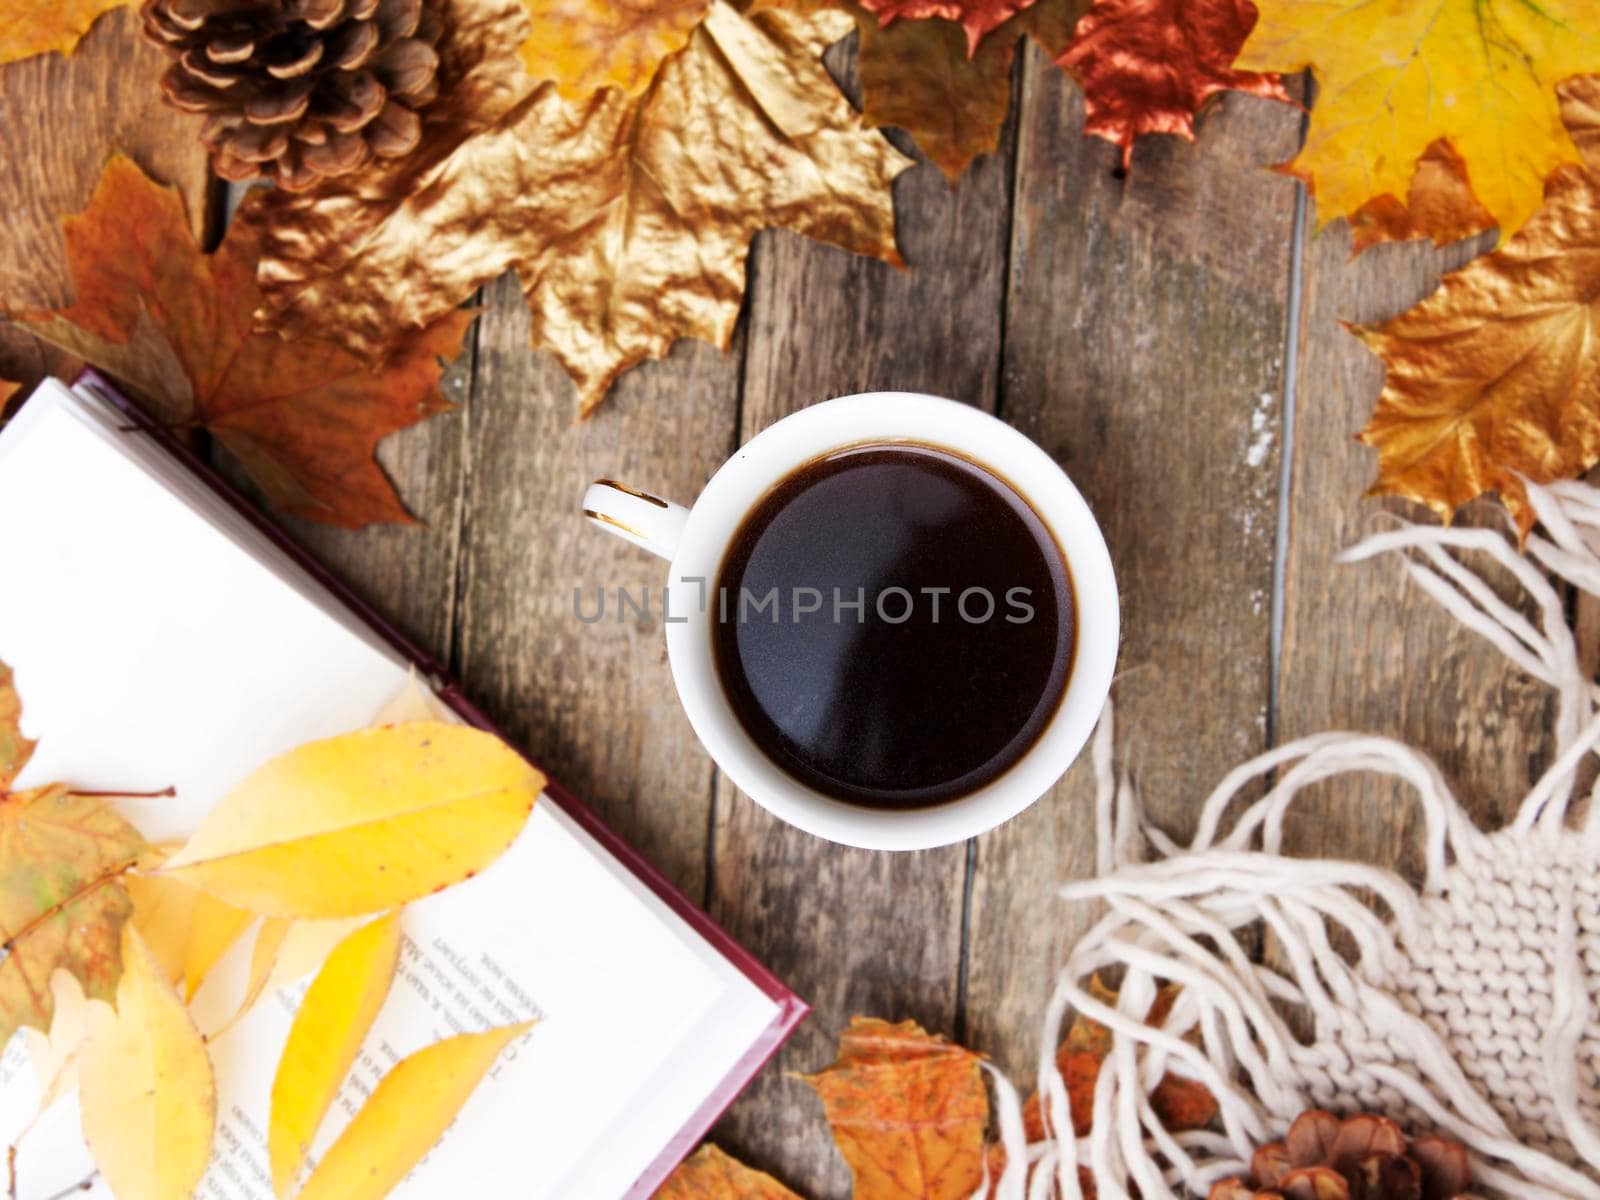 Autumn layout: hot coffee, book, golden autumn leaves, knitted sweater, plaid on a wooden table. Cozy autumn mood in October, November